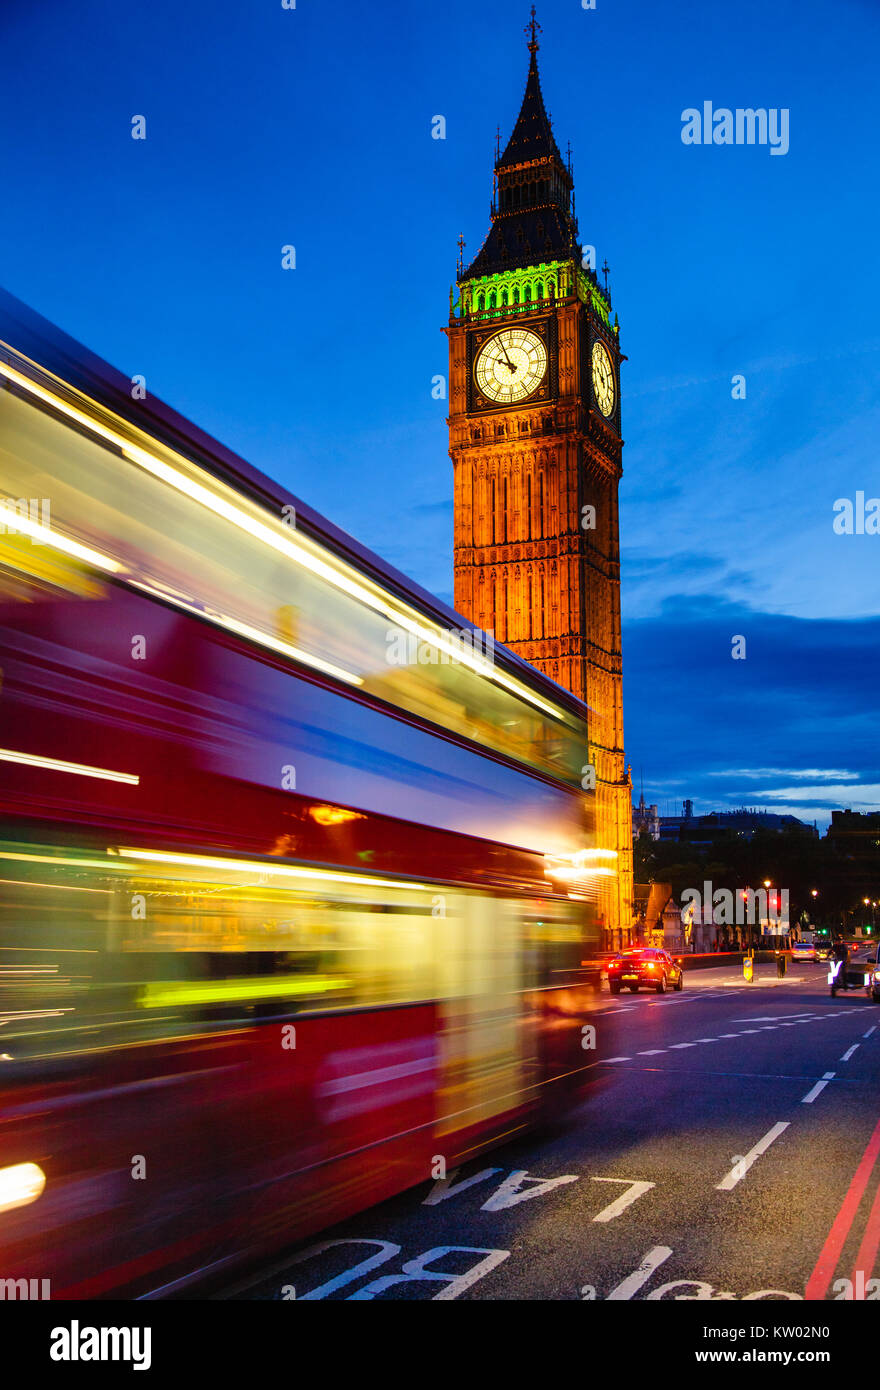 London night traffic scene with Doubledecker bus moves along the Westminster Bridge and  Elizabeth Tower or Big Ben in background Stock Photo